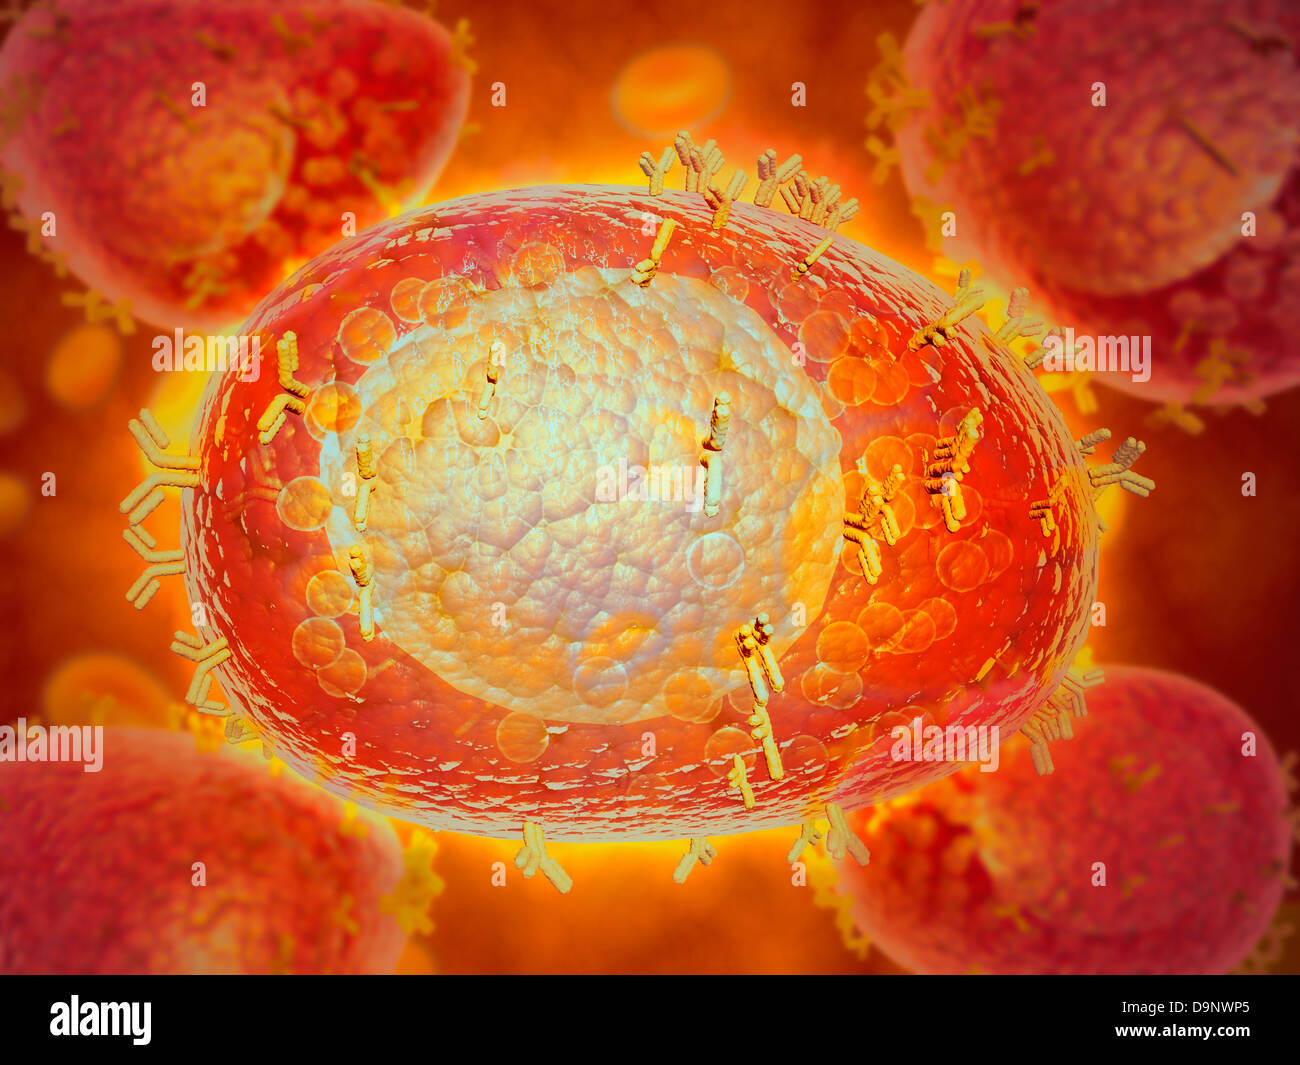 Microscopic view of a mast cell found in connective tissue. Stock Photo